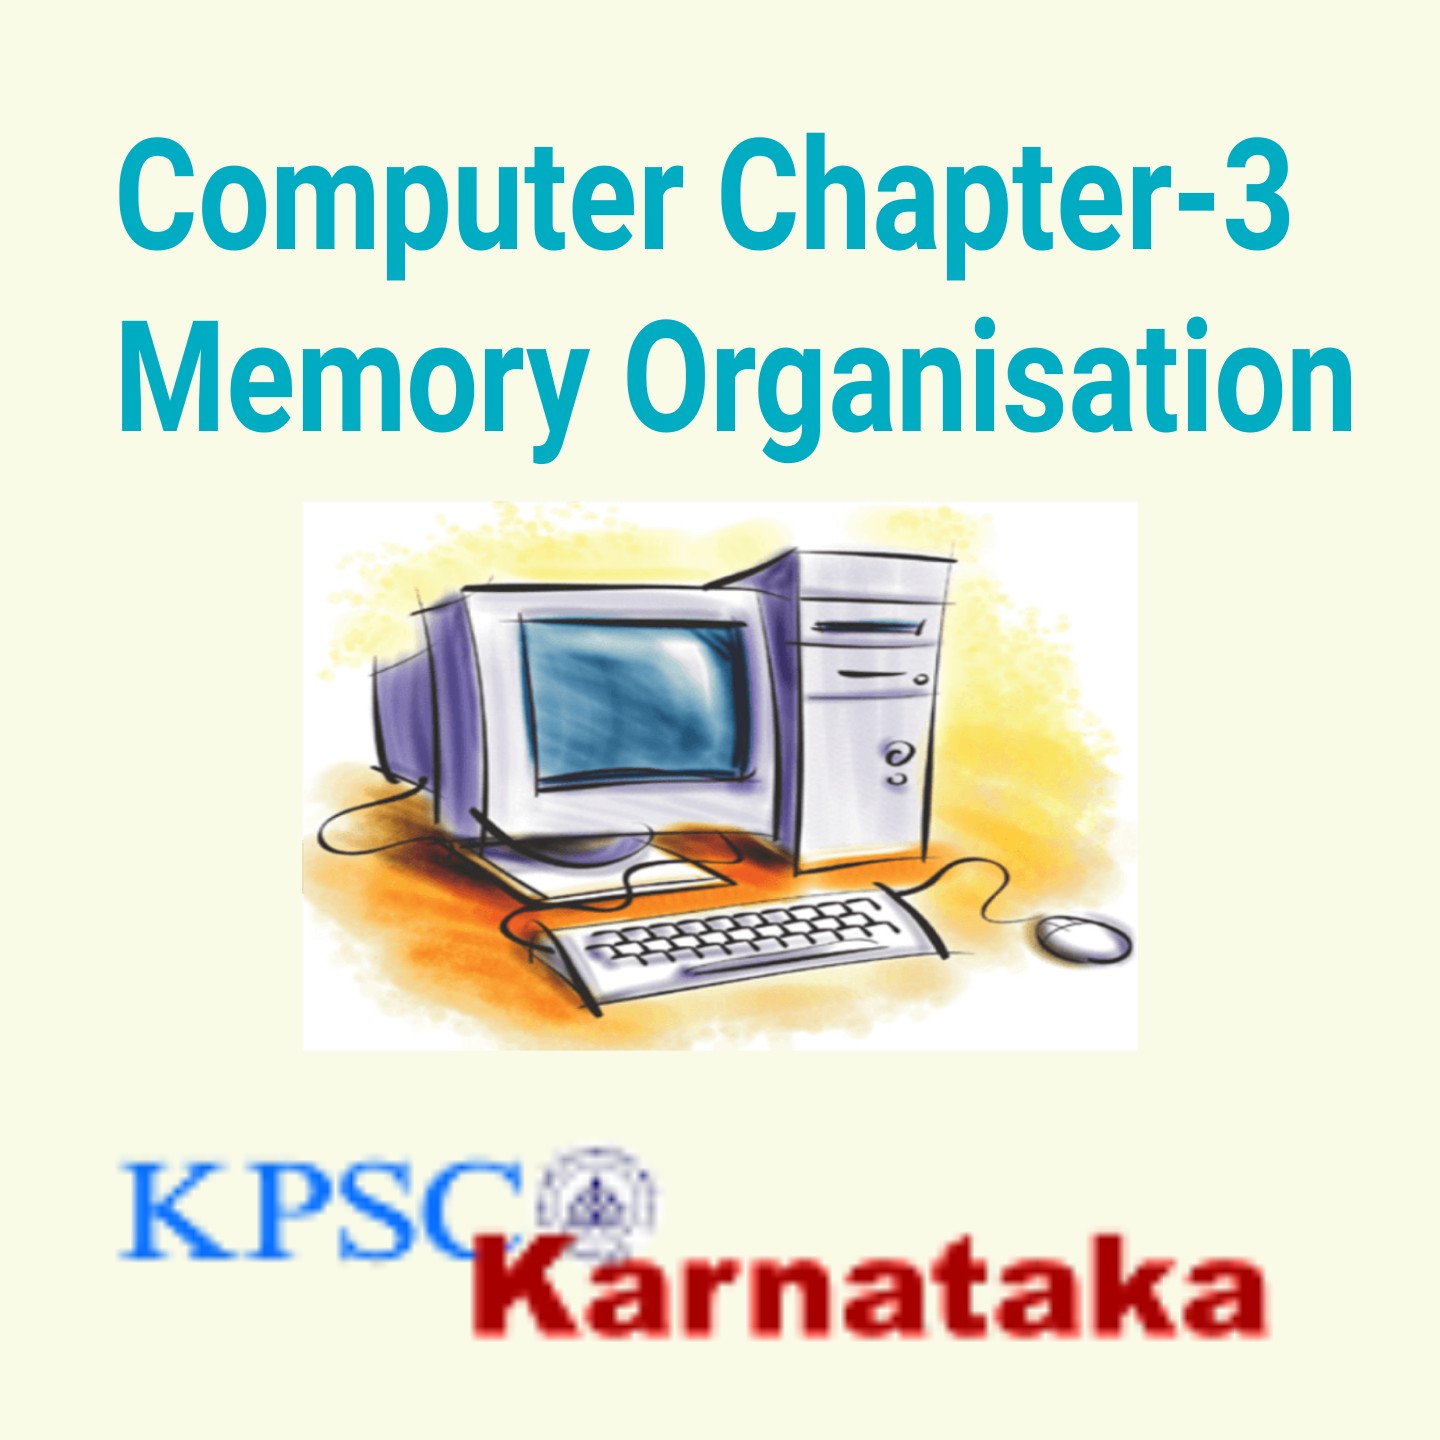 Computer Chapter-3 Memory Organisation